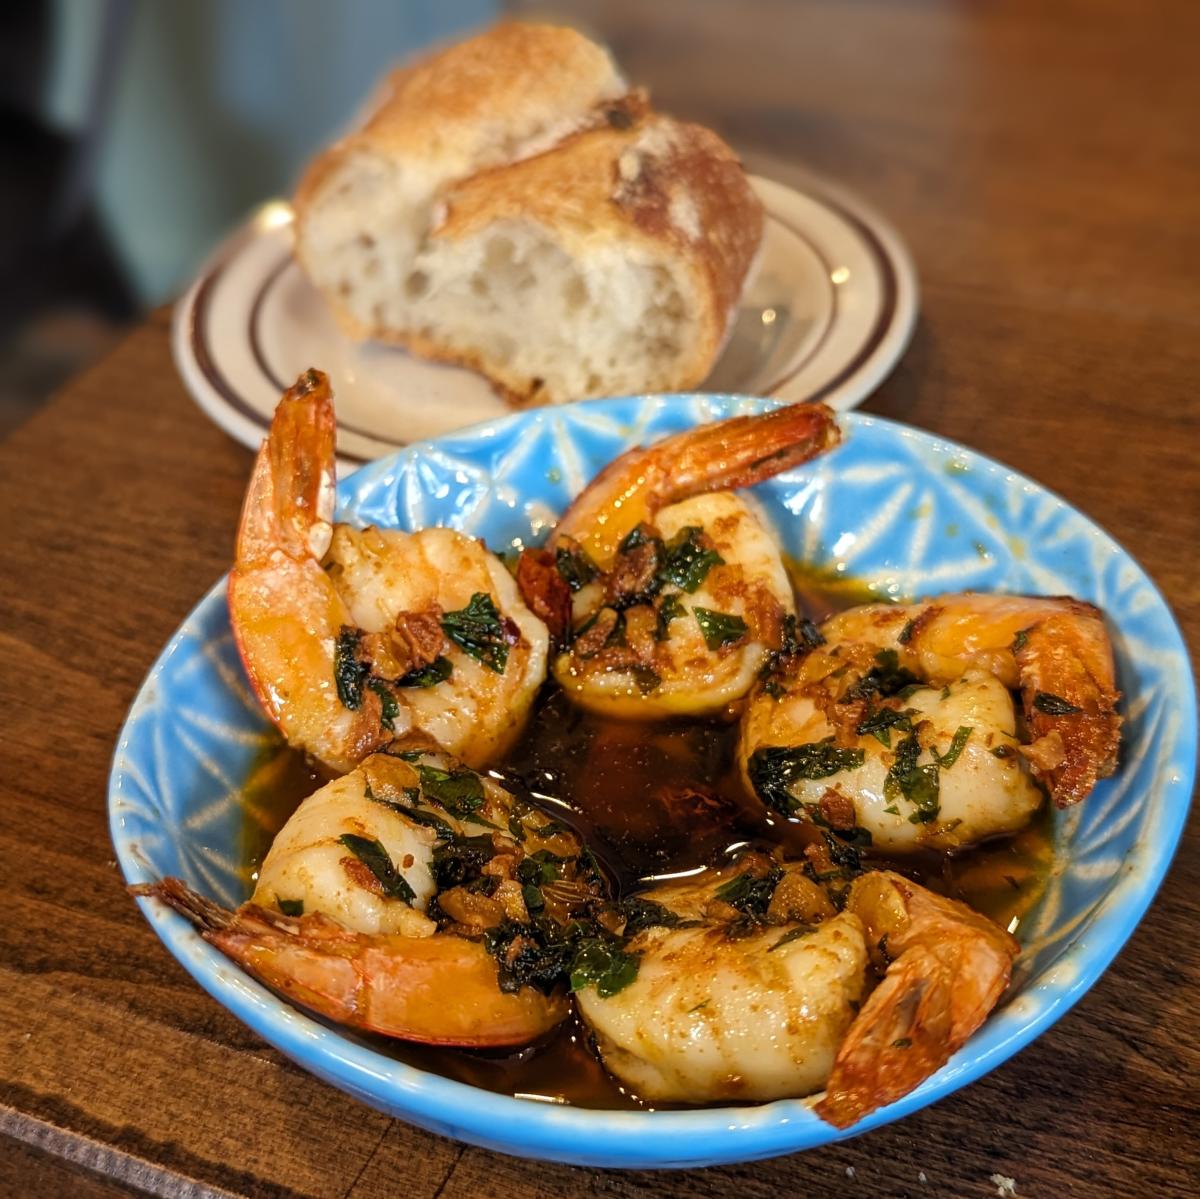 Image is a small plate, featuring shrimp, garlic, Spanish sherry, guindilla pepper and a crostini.